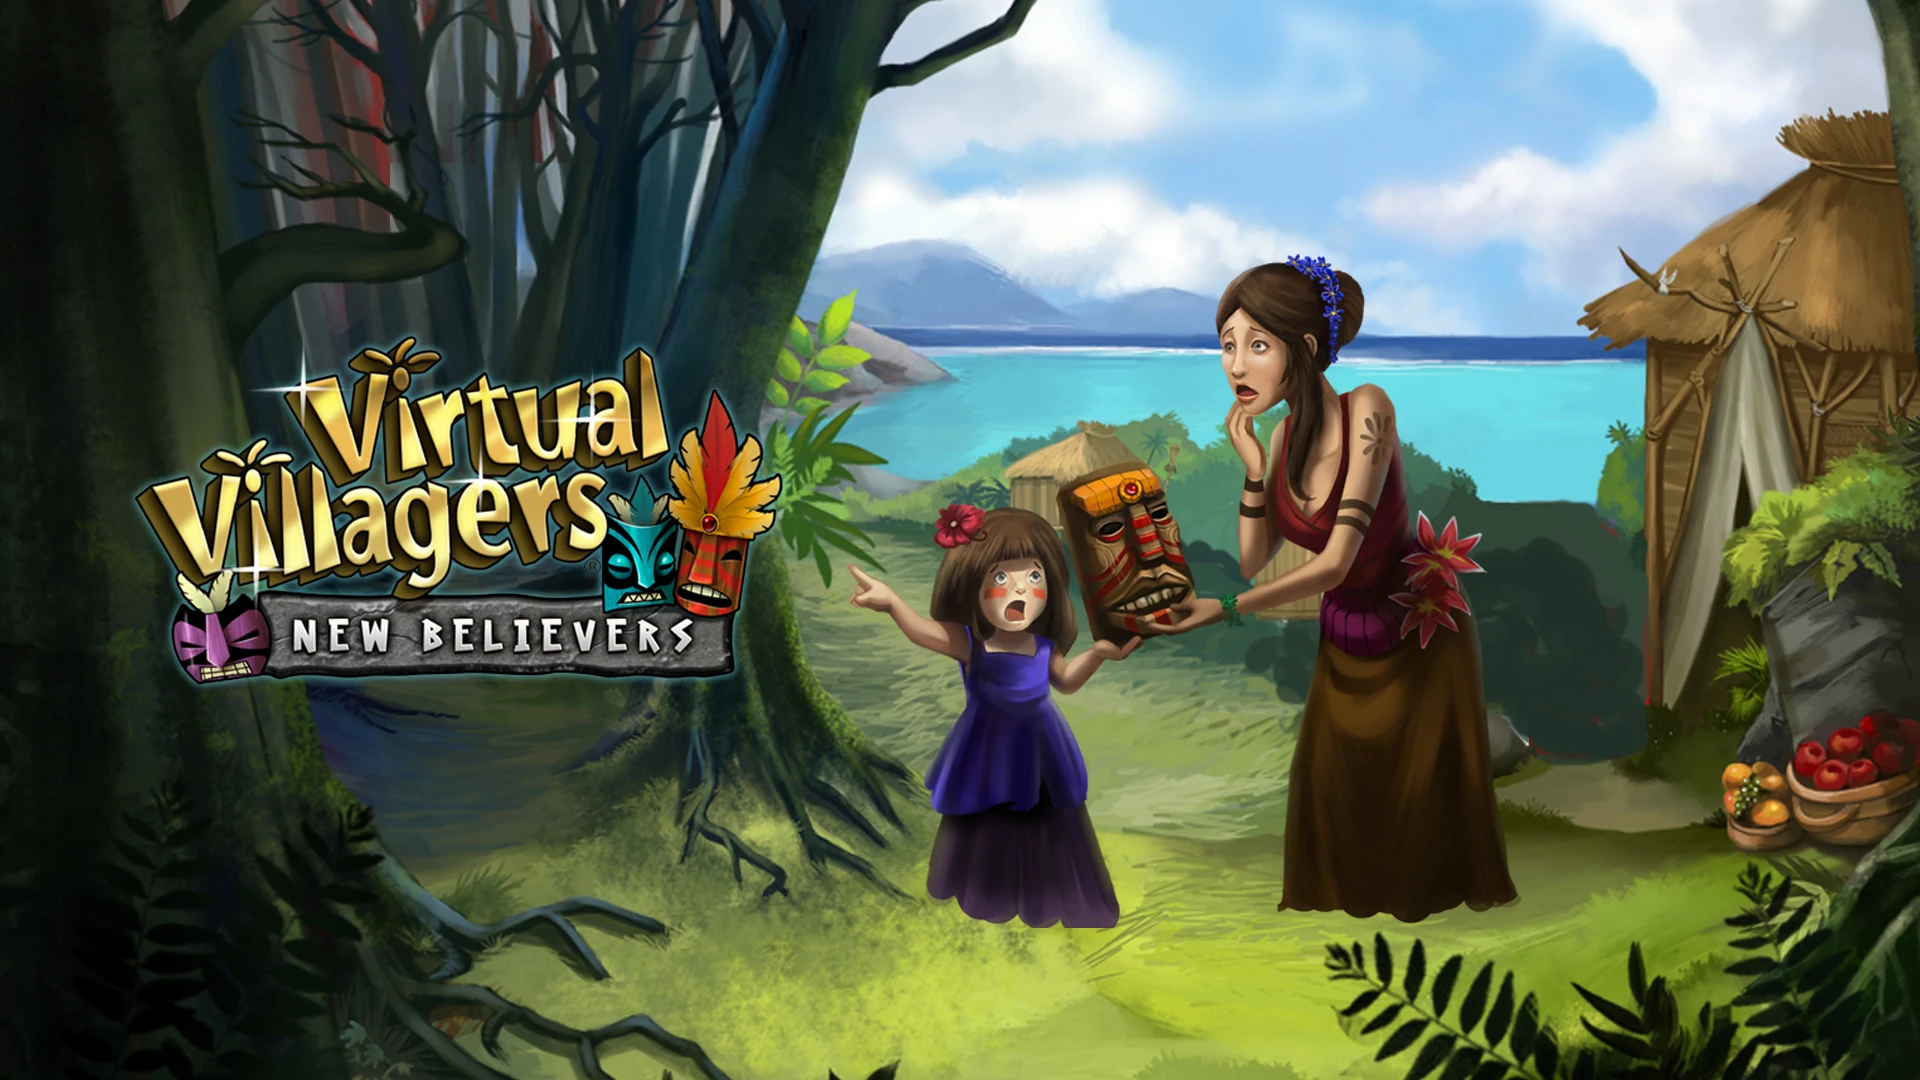 Download Virtual Villagers 5 New Believers Game